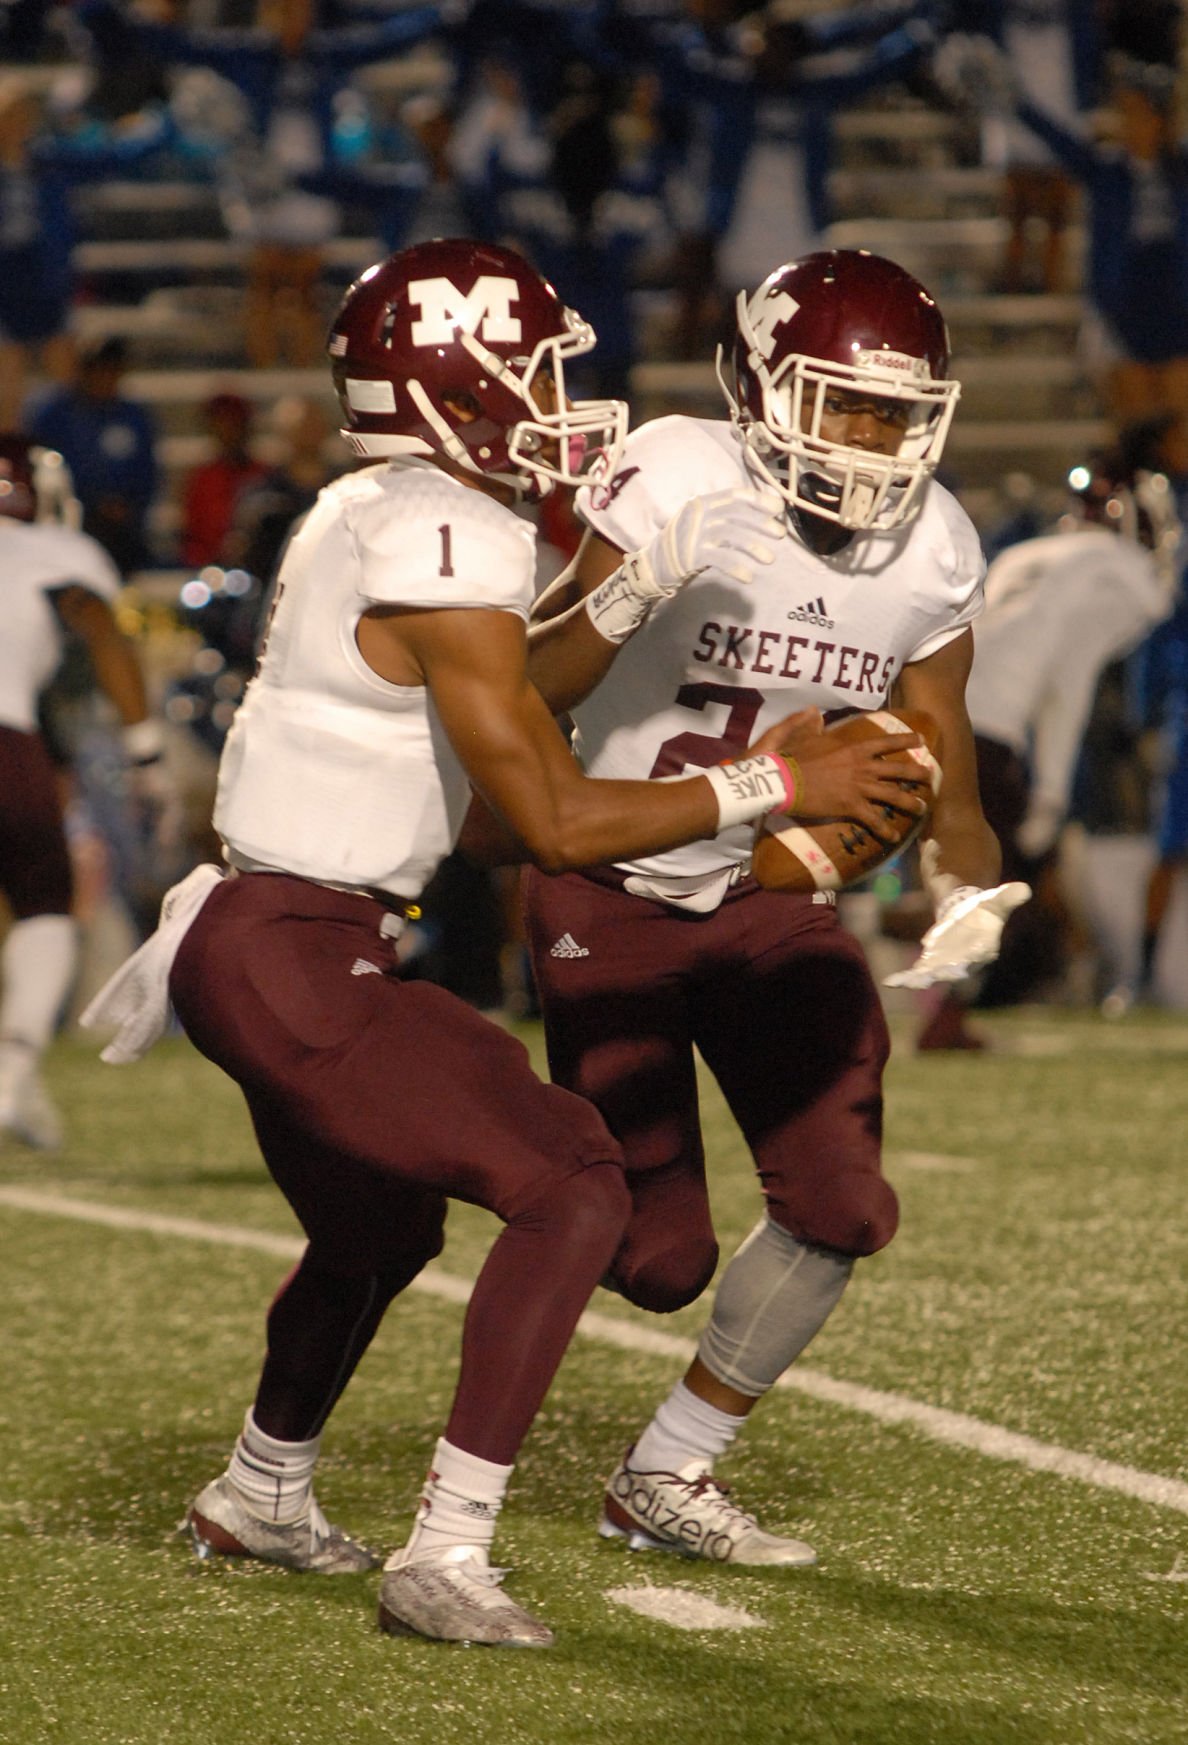 Mesquite Football History: Skeeters boast one of the oldest traditions